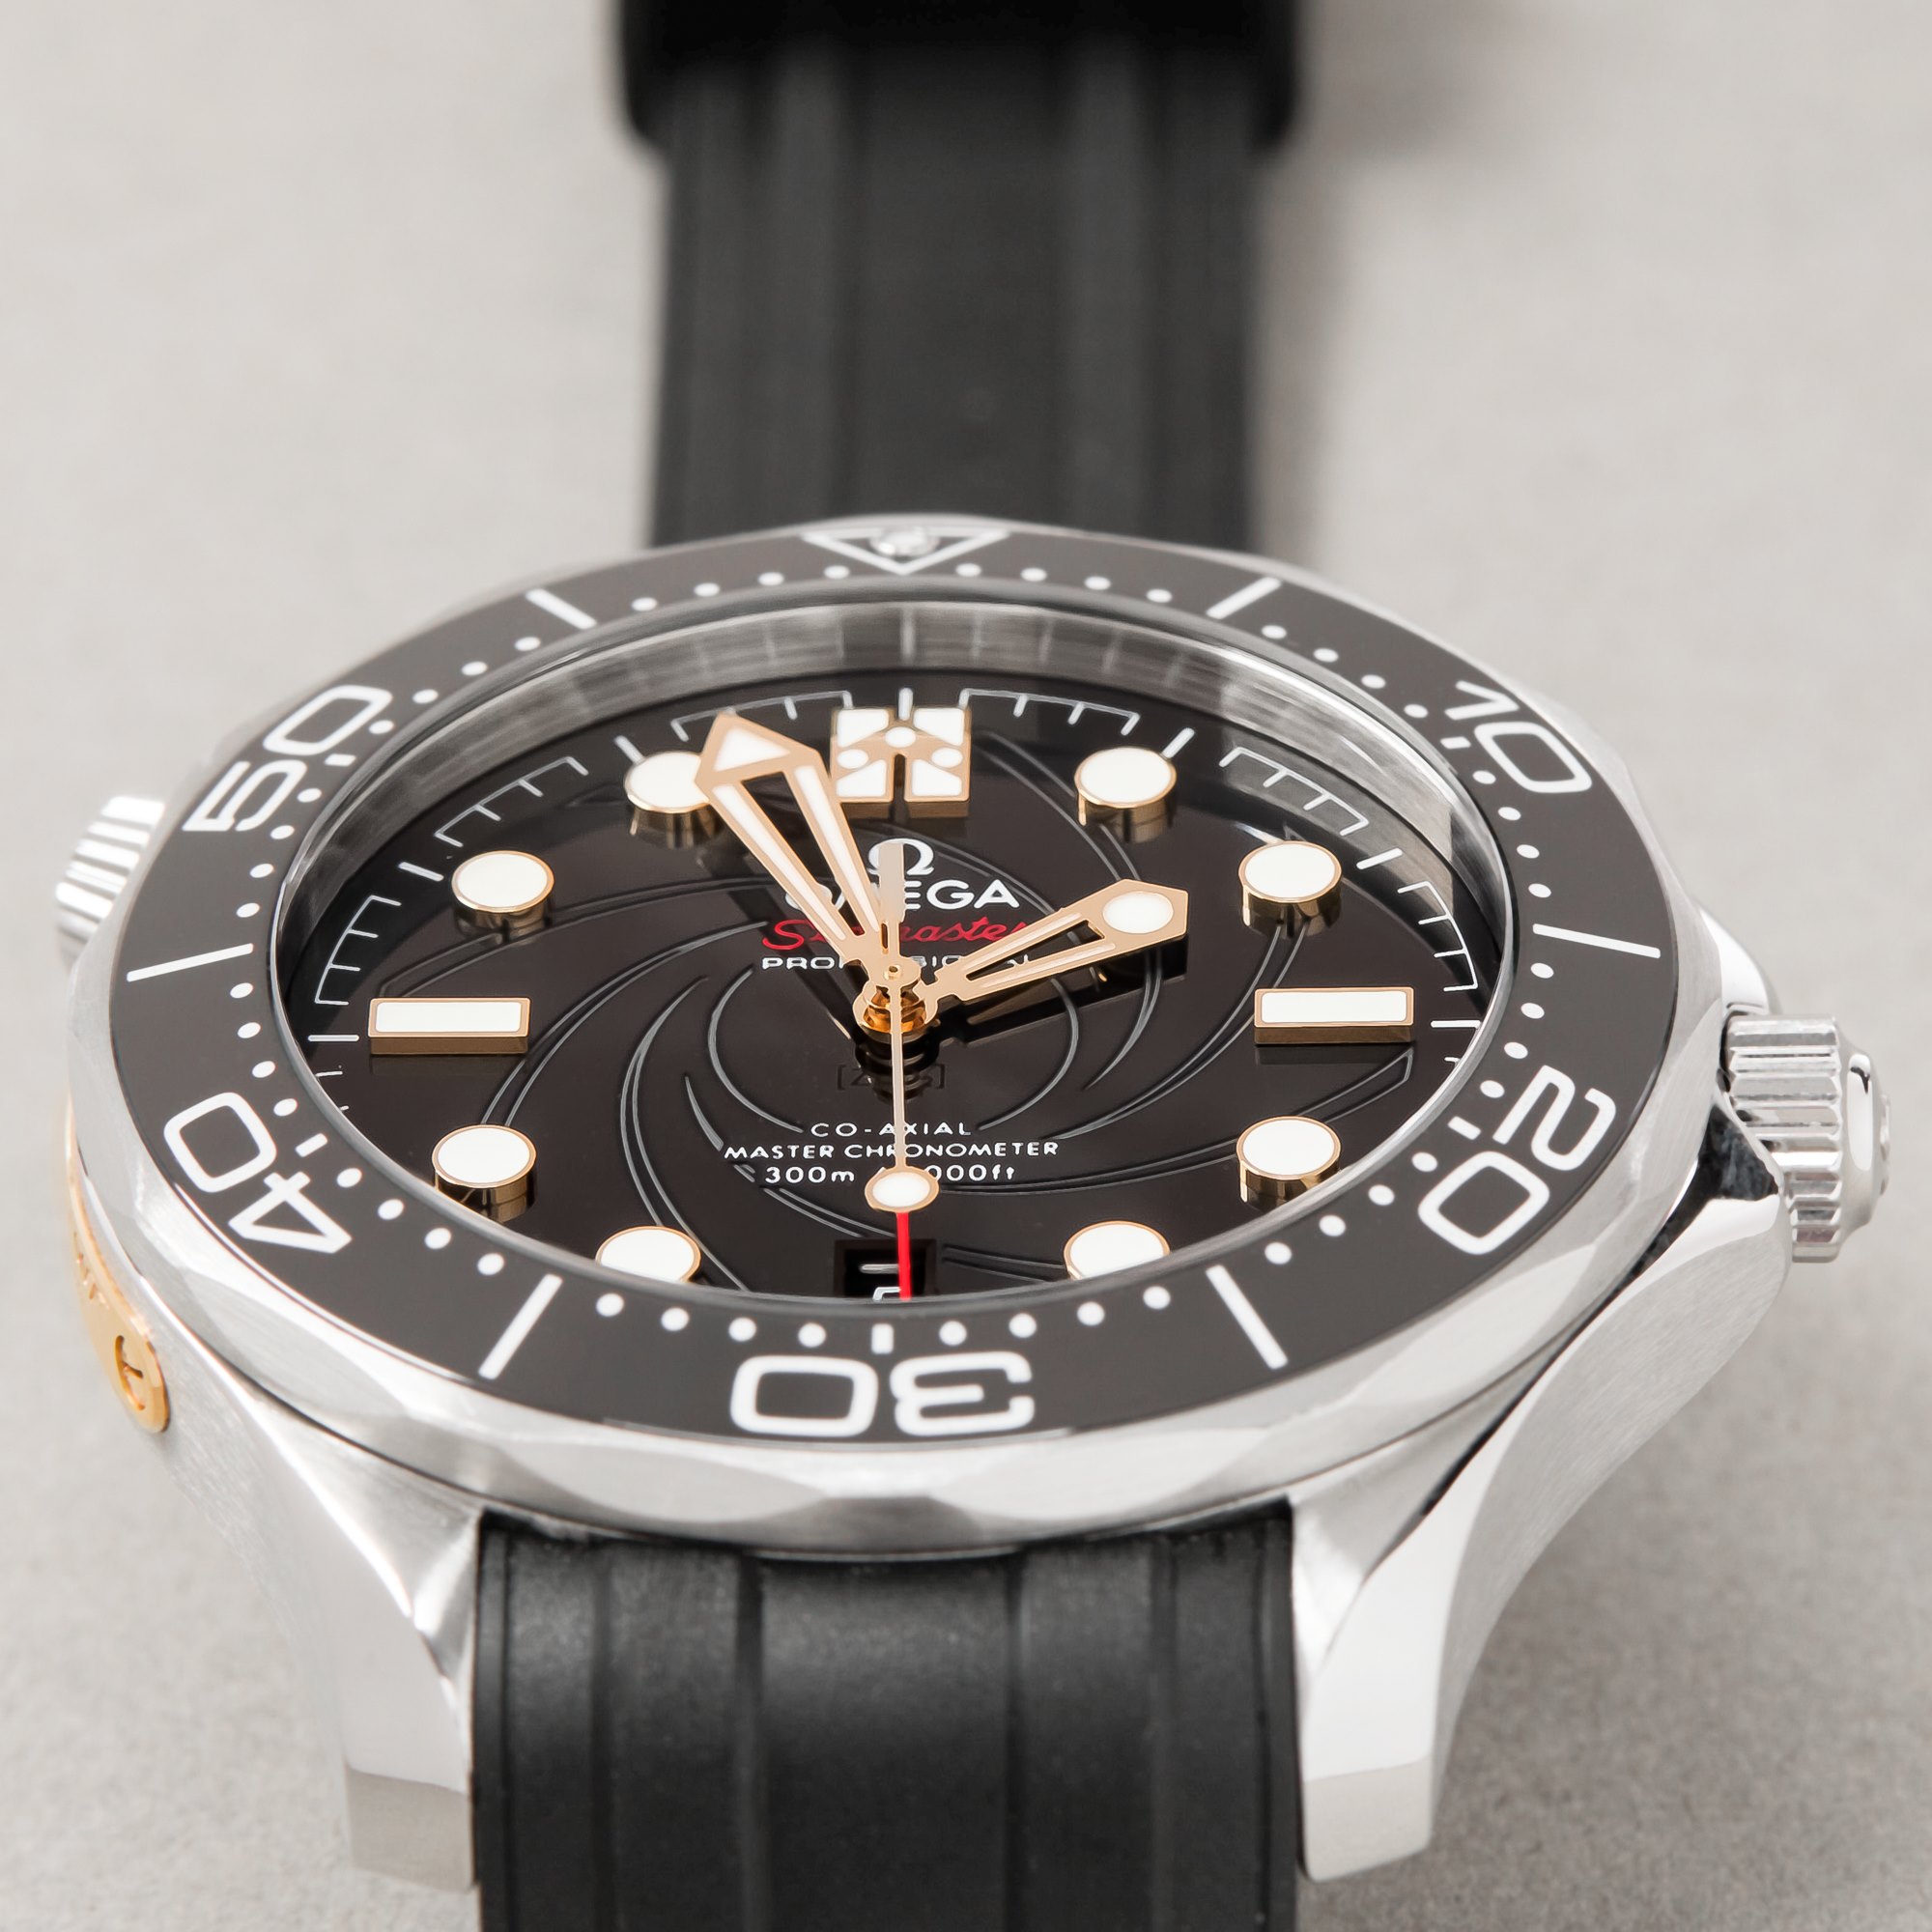 Omega Seamaster James Bond Spectre Limited Edition to 7007 Pieces Stainless Steel 210.22.42.20.01.004